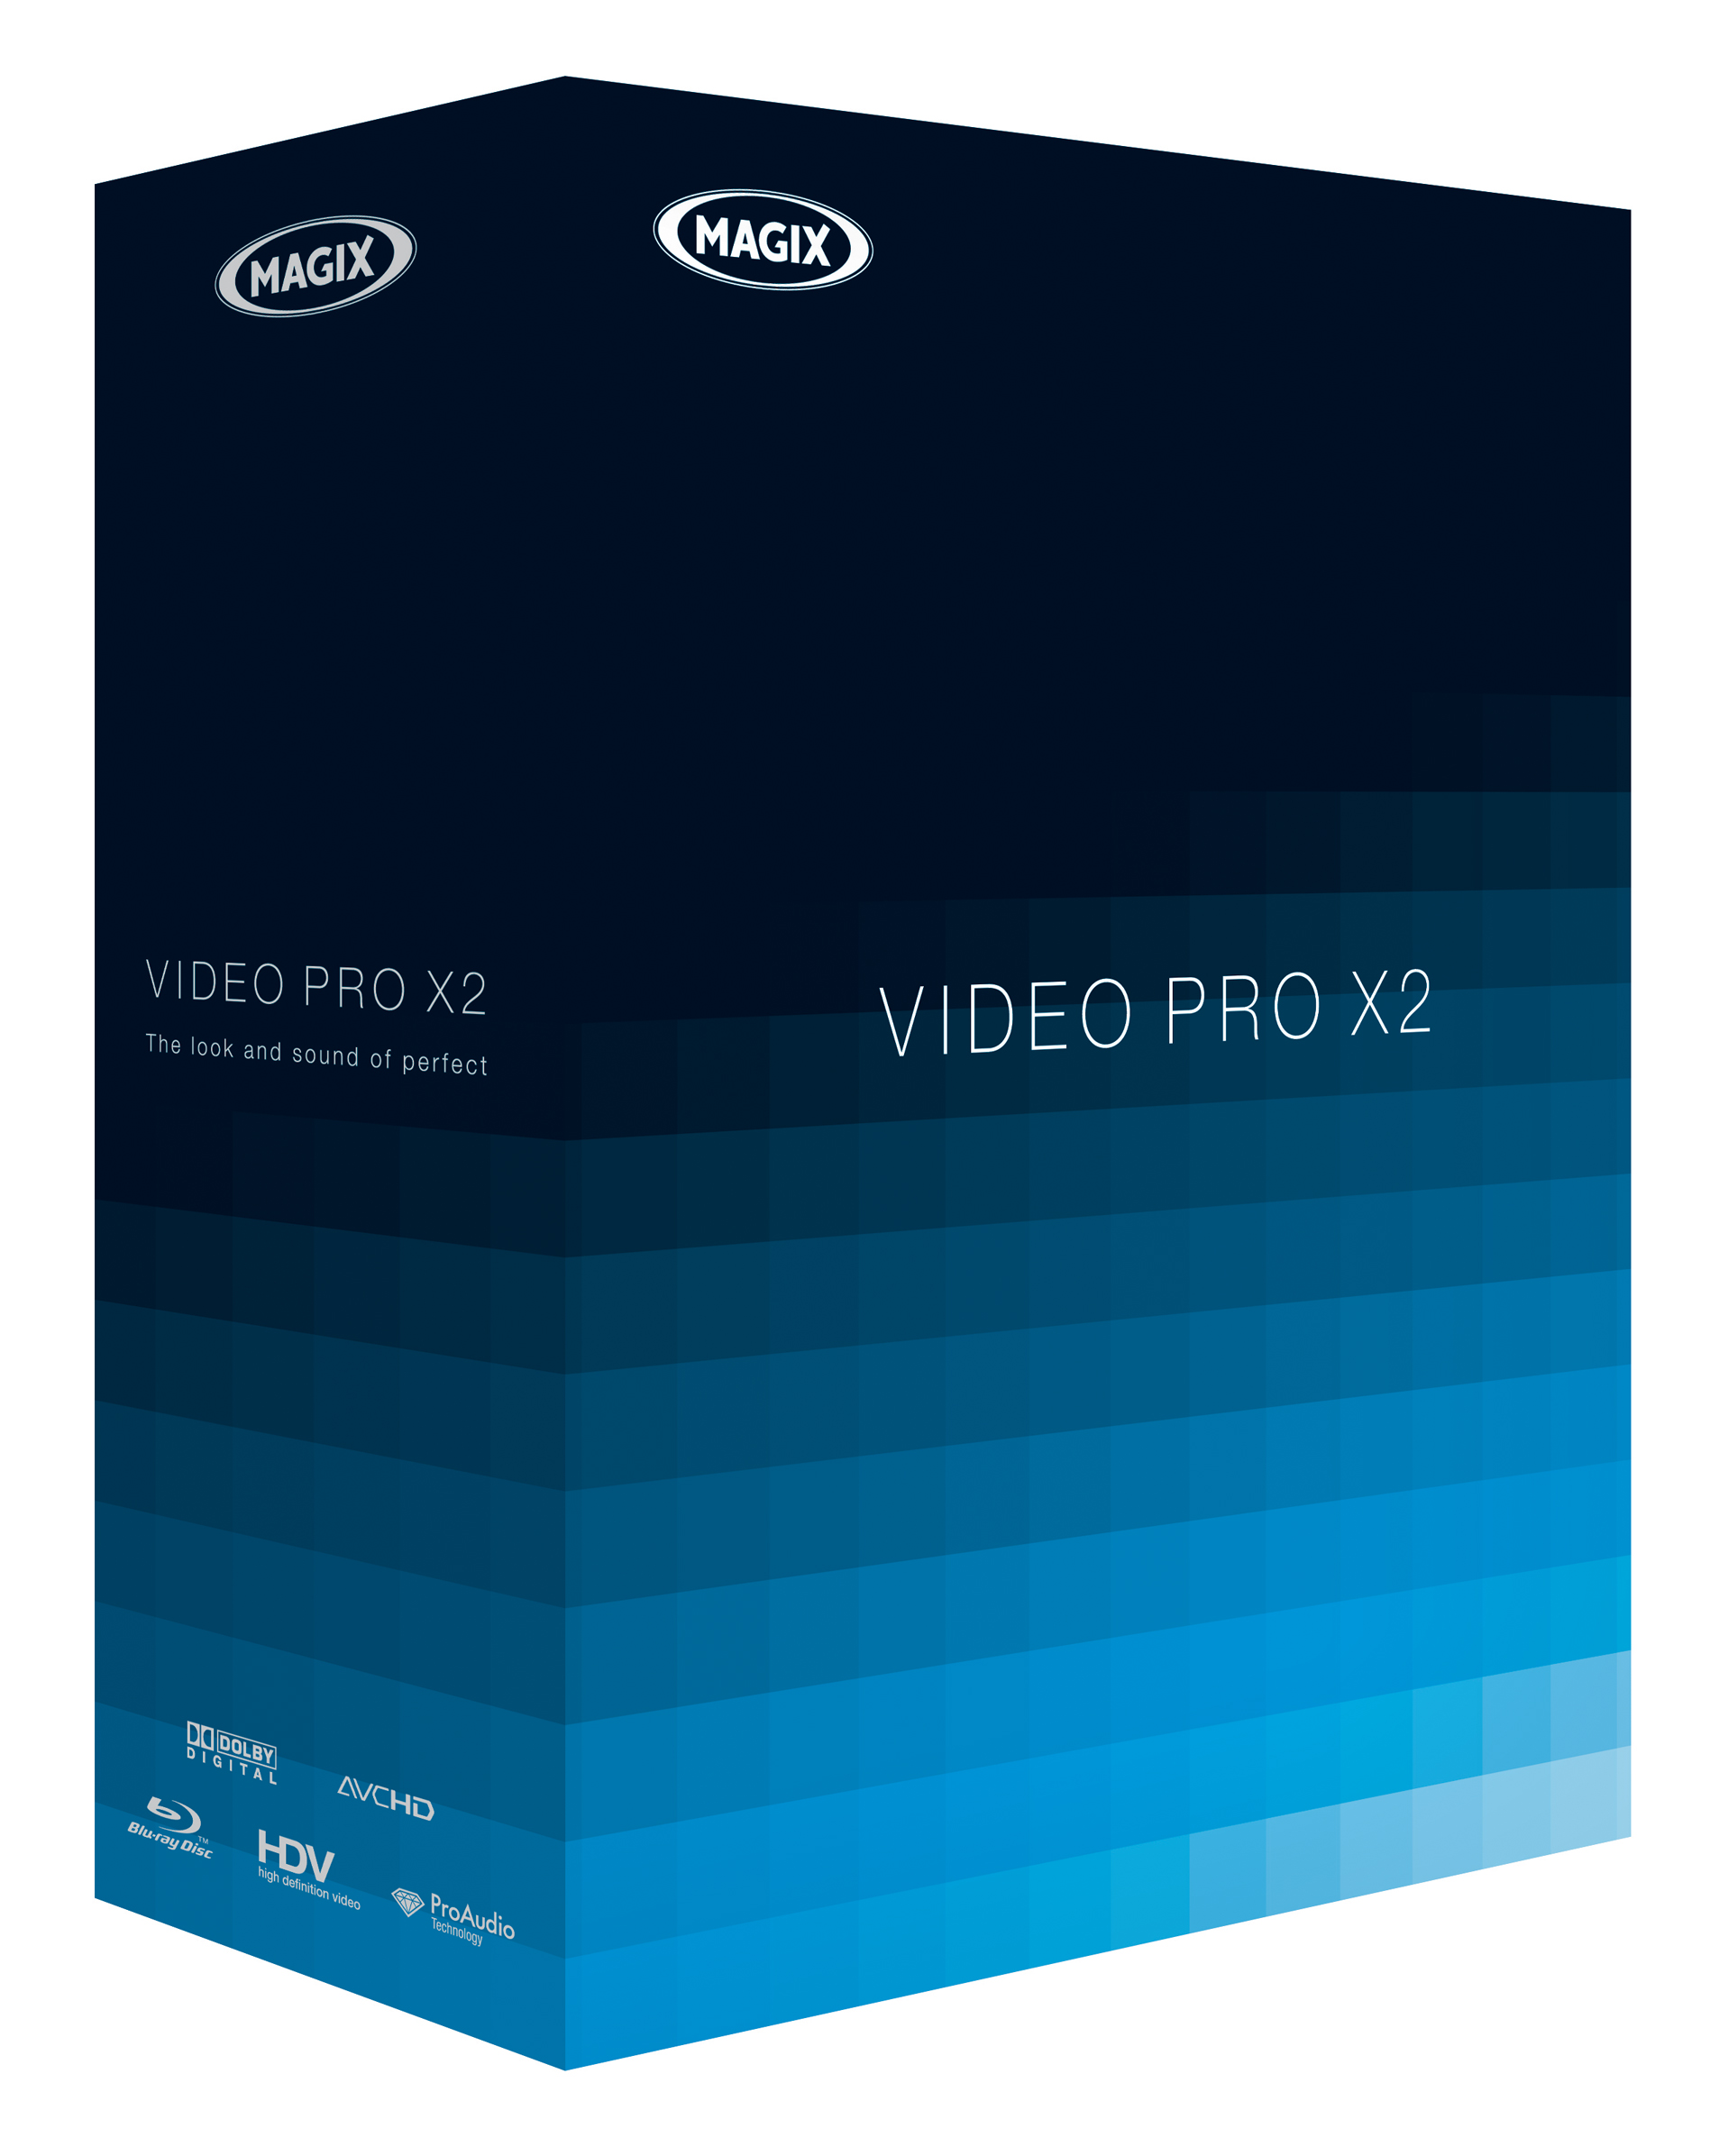 download the last version for ipod MAGIX Video Pro X15 v21.0.1.193